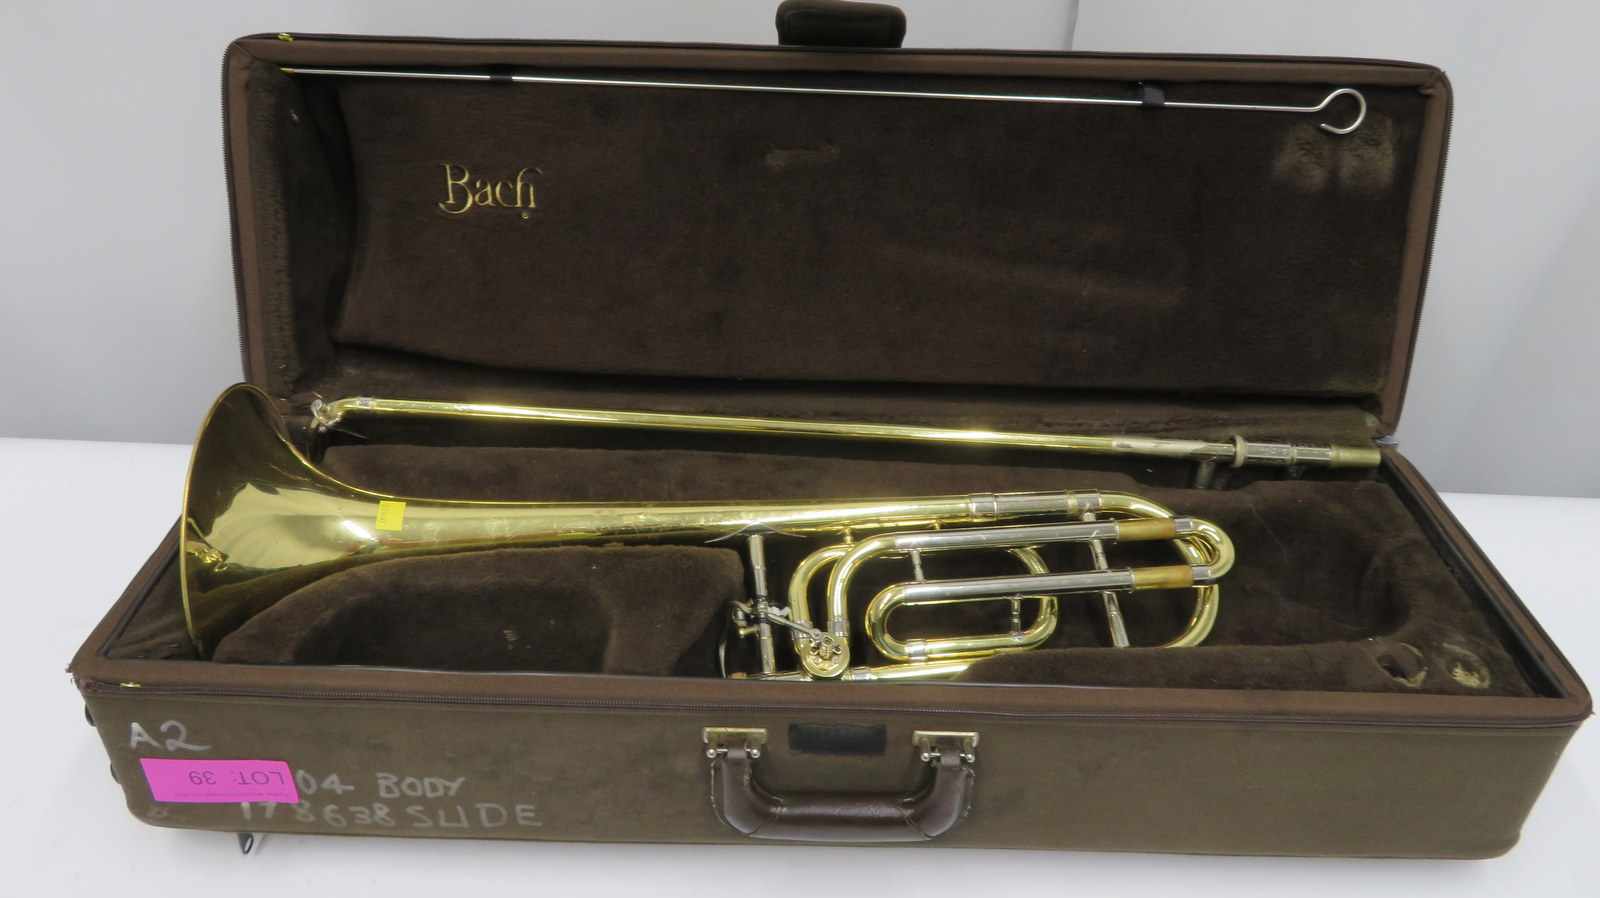 Bach Stradivarius model 42 trombone with case. Serial number: 41004.